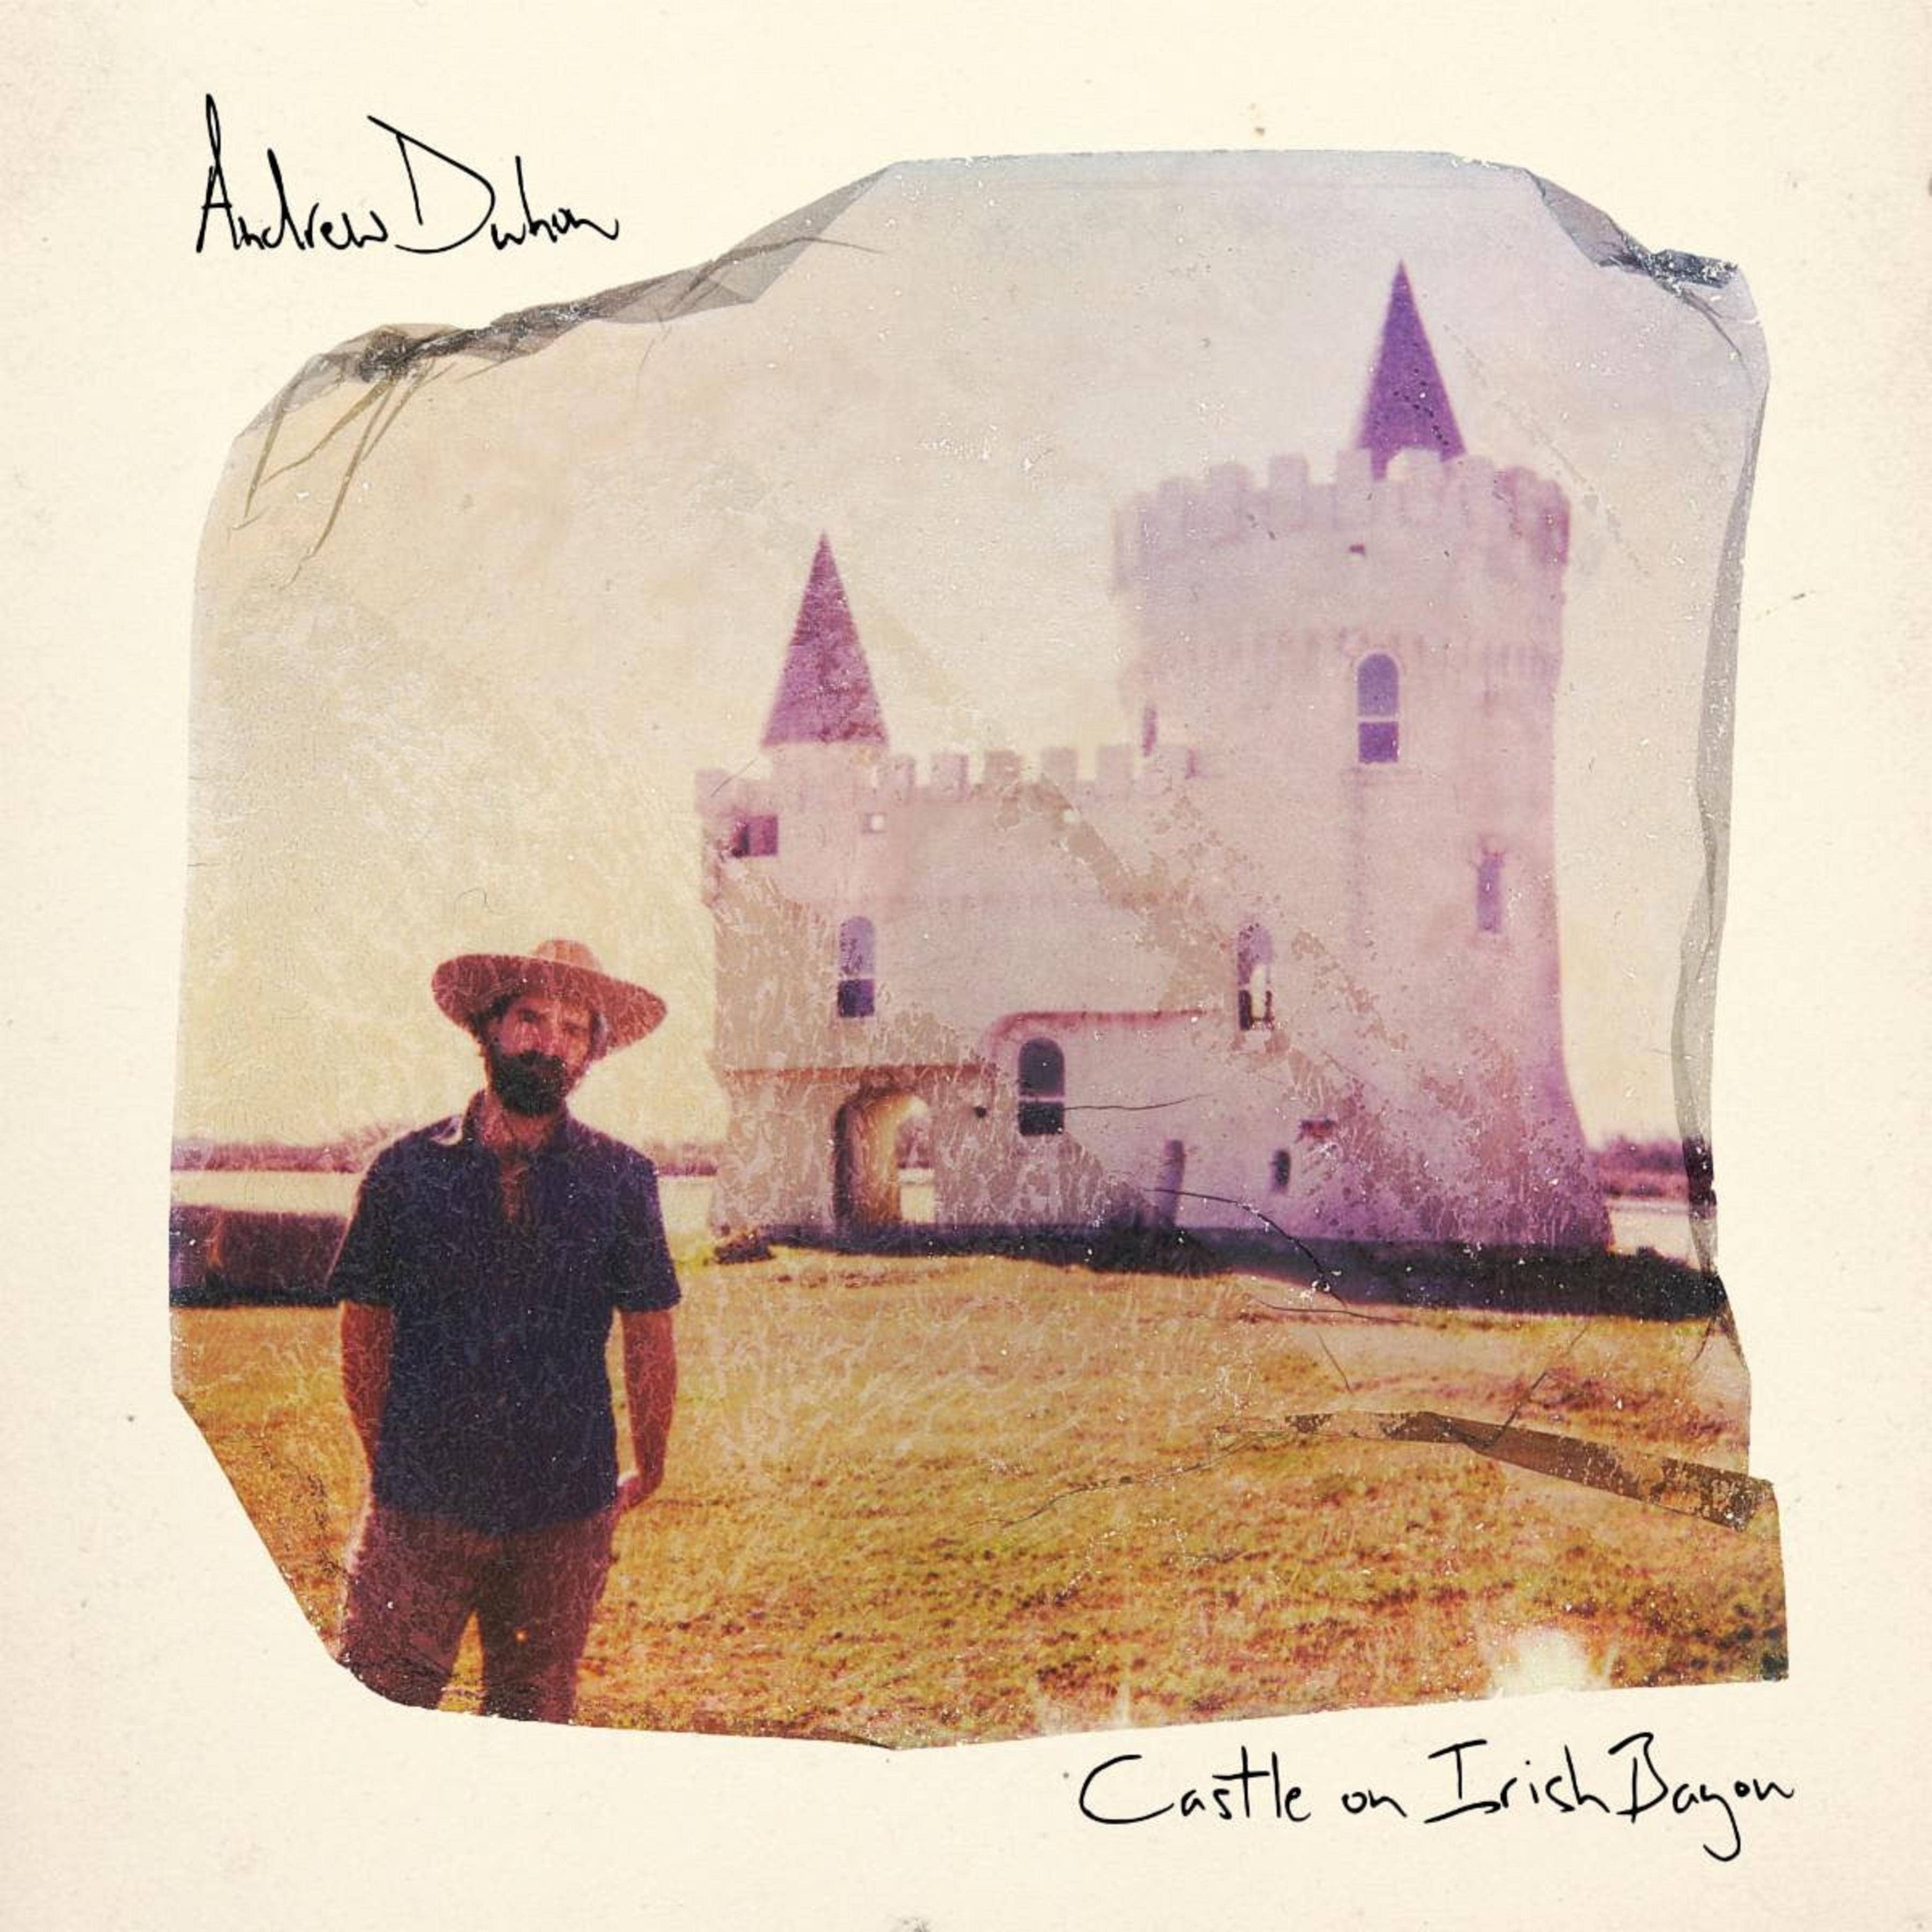 Andrew Duhon Considers Life As A Louisiana King In A Real-Deal Castle With Infectious New Tune “Castle On Irish Bayou"